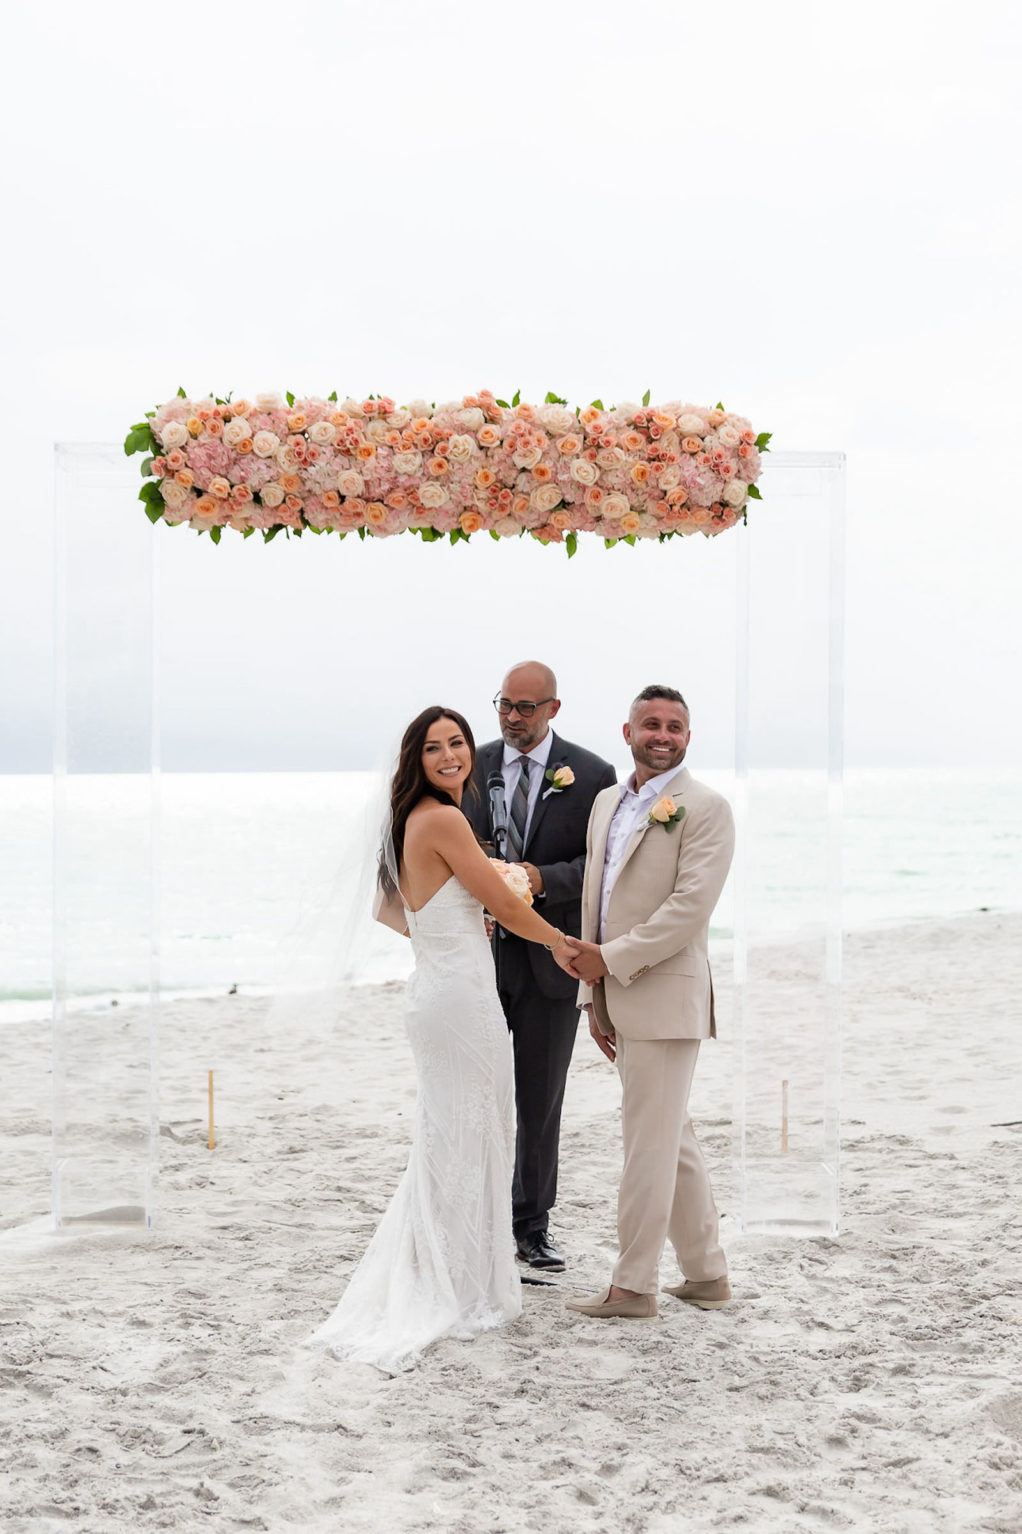 Bride and Groom Exchanging Vows at Florida Beach Wedding at Sarasota Wedding Venue The Resort at Longboat Key Club | Ceremony Backdrop with Clear Acrylic Arch and Floral Arrangement of Peach Pink and Coral Roses | Bride Wearing Strapless Sheath Wedding Gown by Tara Keilly | Groom Wearing Casual Khaki Suit